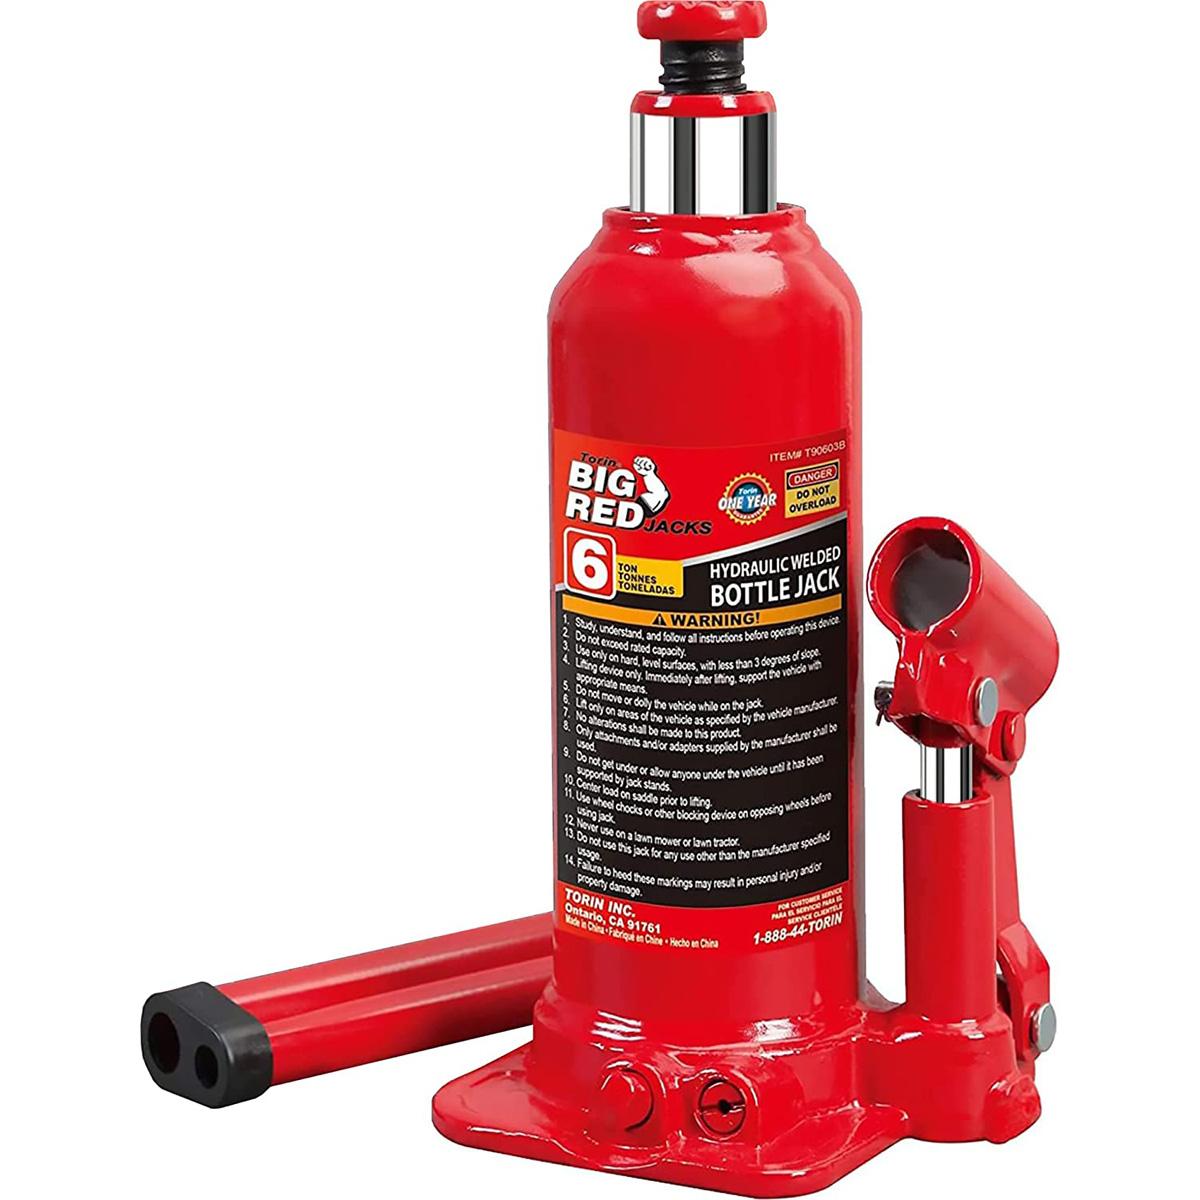 Big Red 6-Ton Capacity Hydraulic Welded Bottle Jack for $19.68